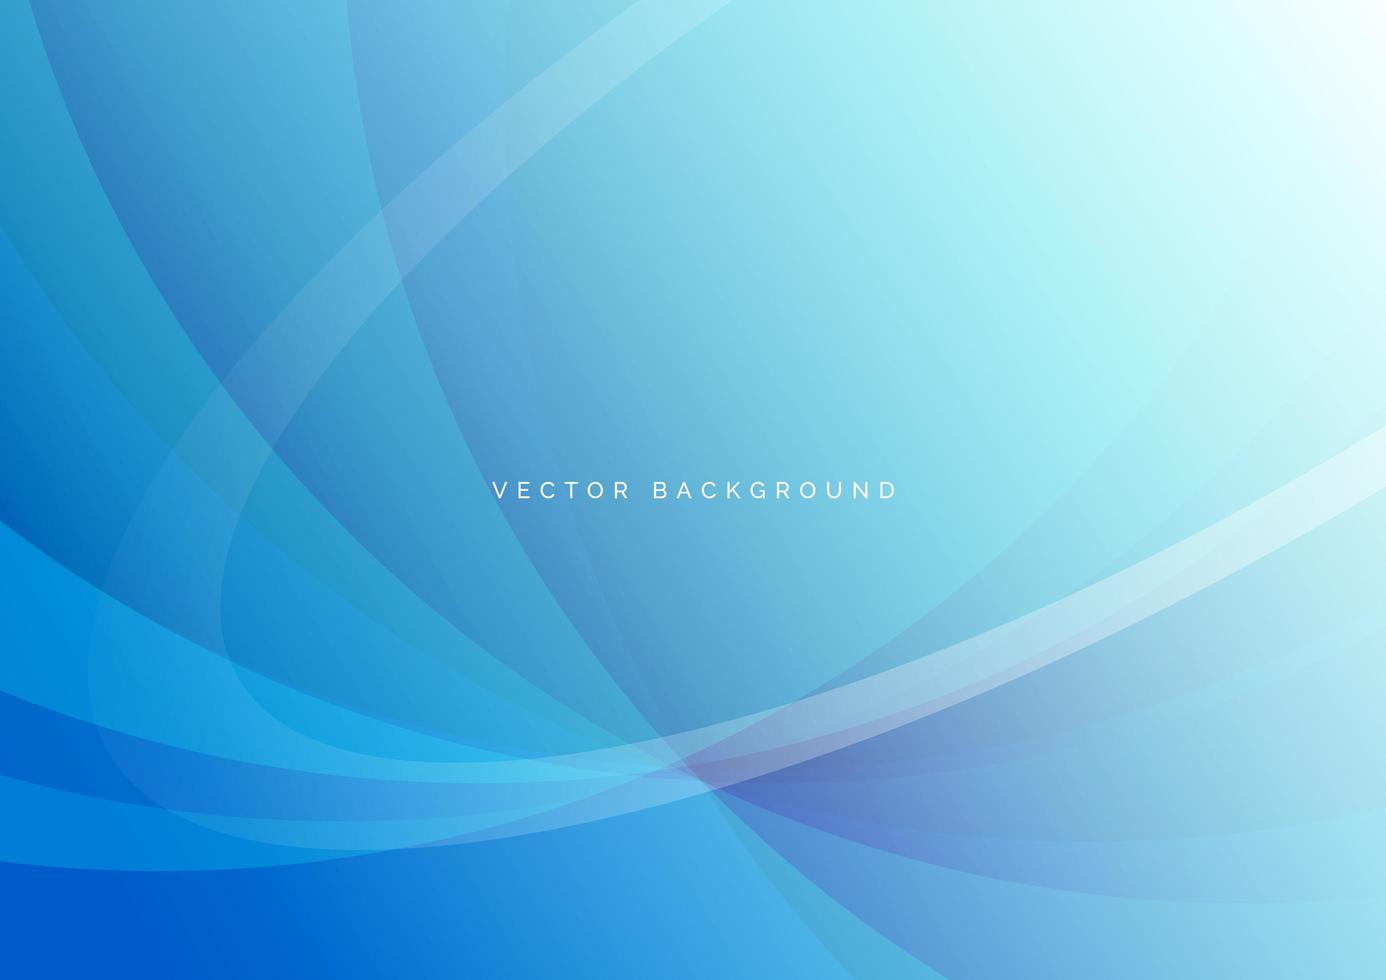 Abstract and elegant light blue curves background vector